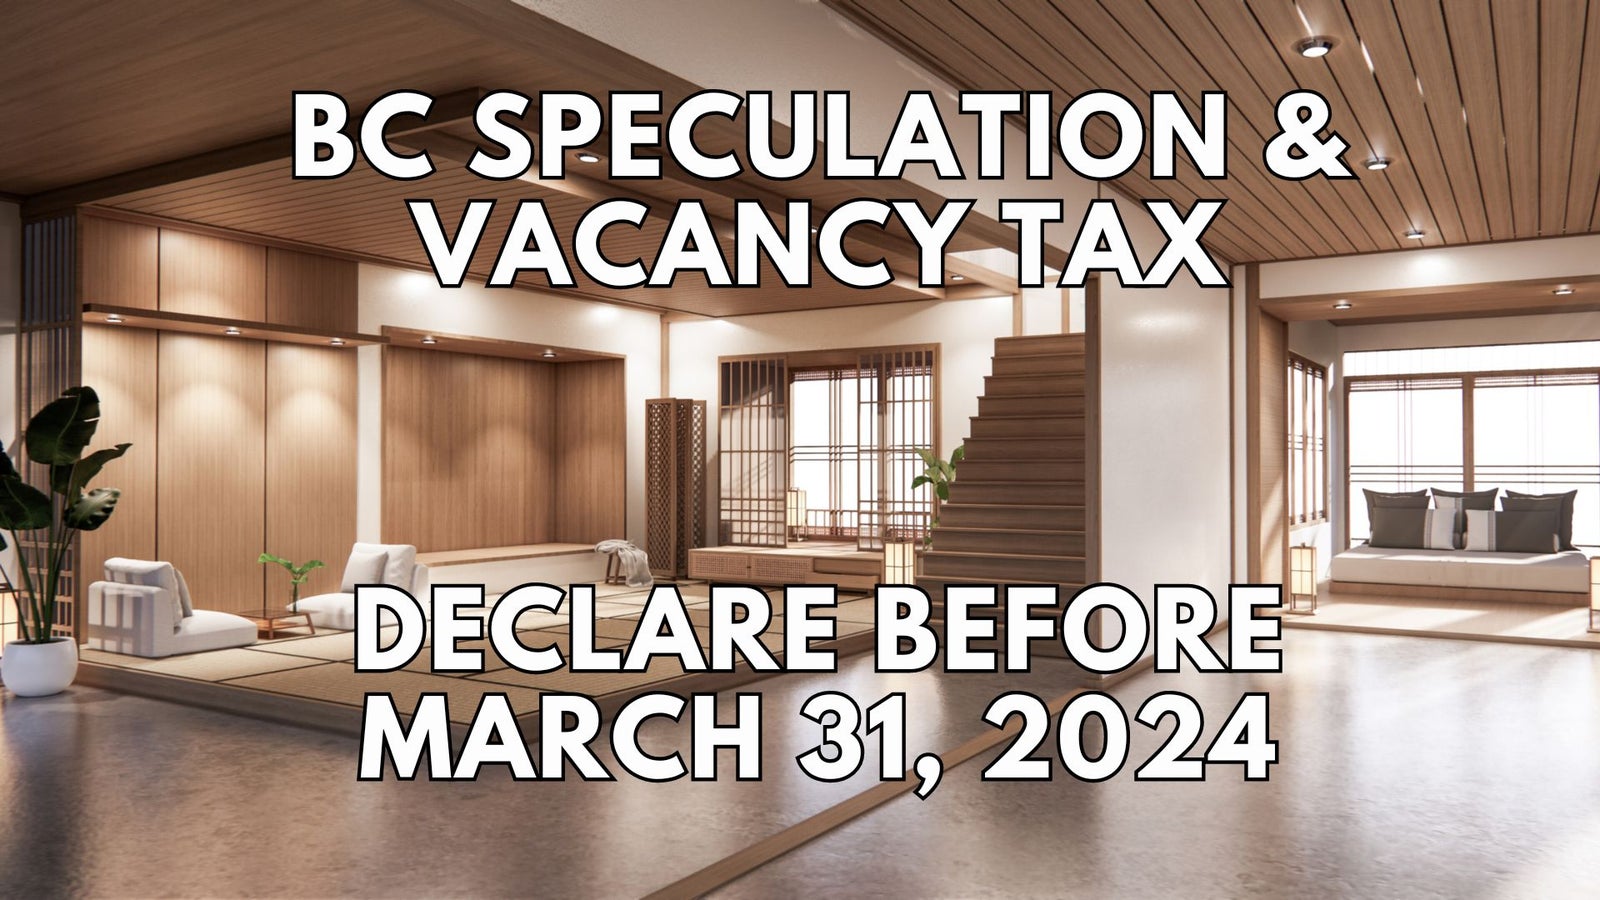 BC Speculation & Vacancy Tax 2024 reminder by Cari Mai Vancouver Realtor